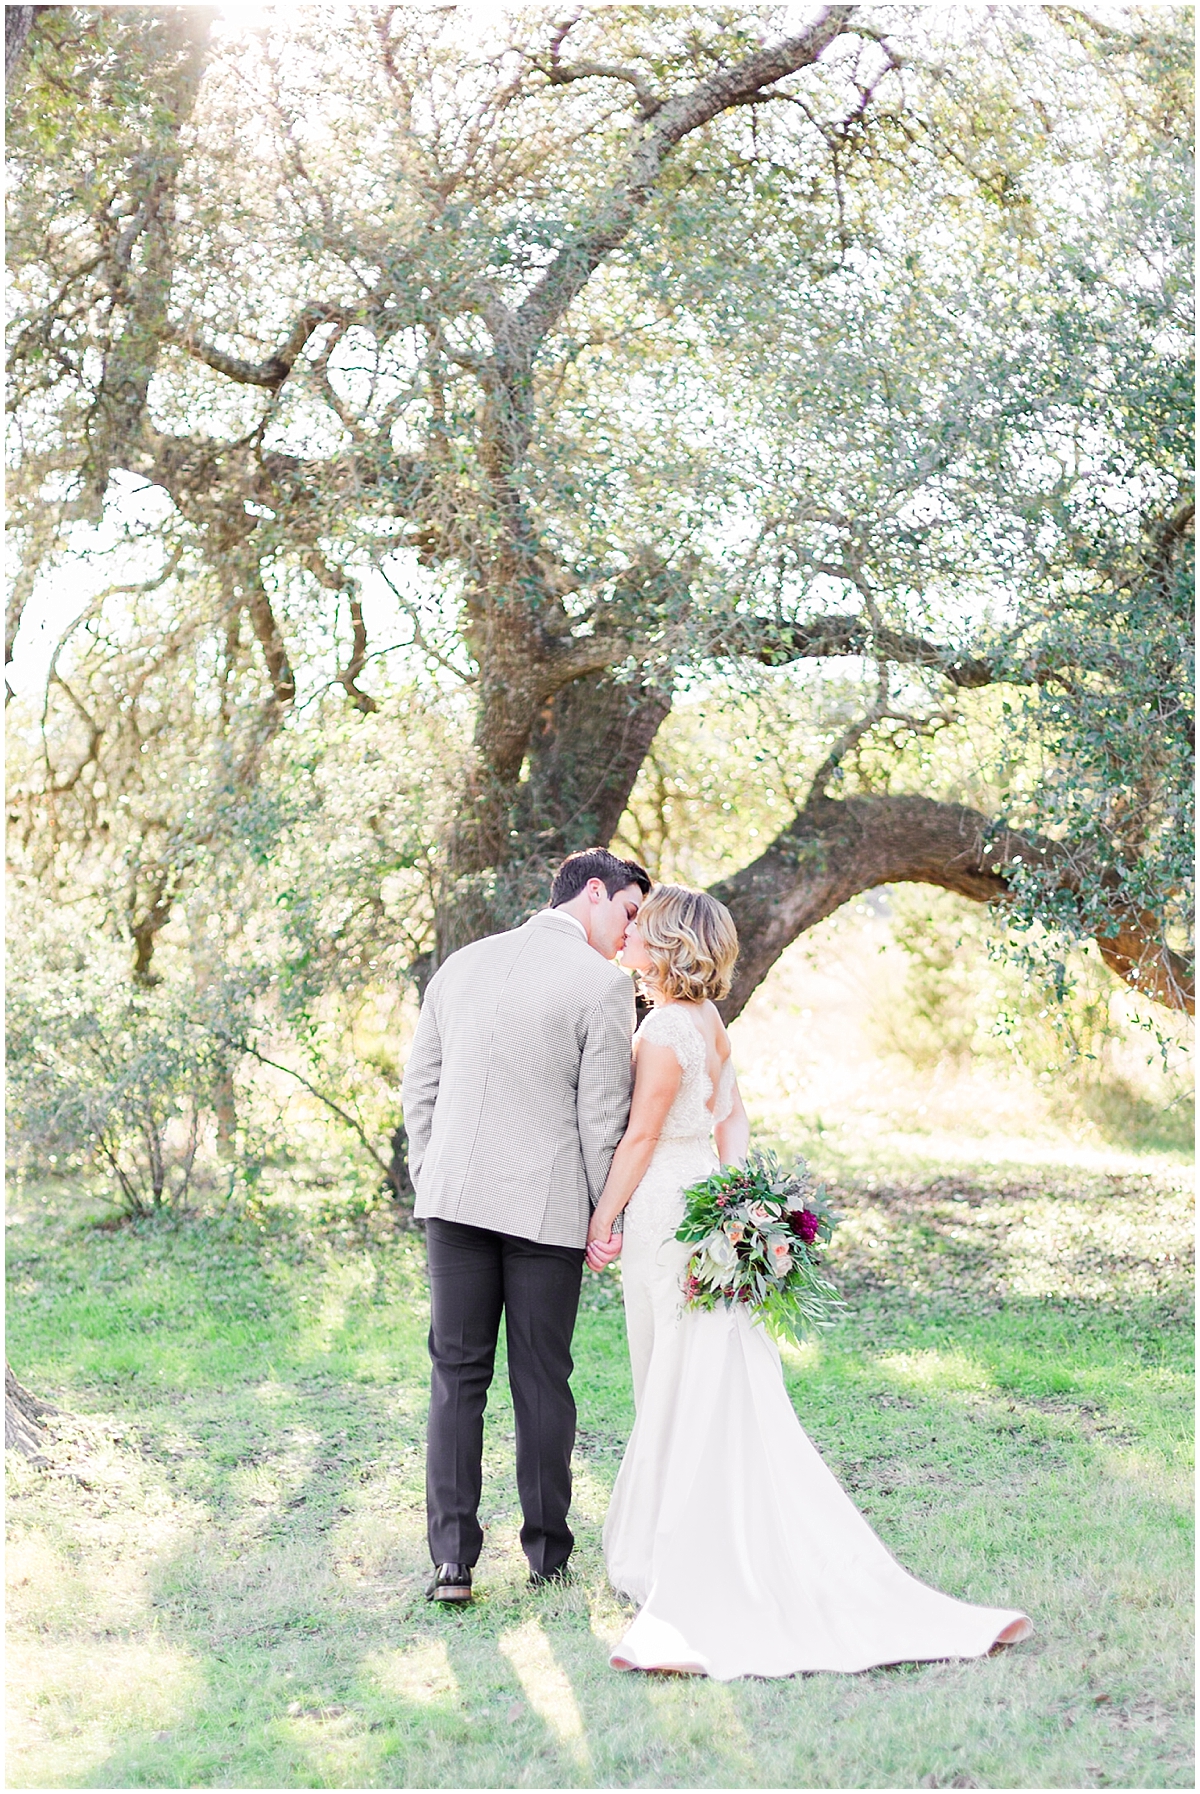 a-classic-modern-black-and-white-wedding-with-gold-accents-inspirational-shoot-at-pecan-springs-ranch-by-allison-jeffers-wedding-photography-dripping-springs-wedding-photographer_0033